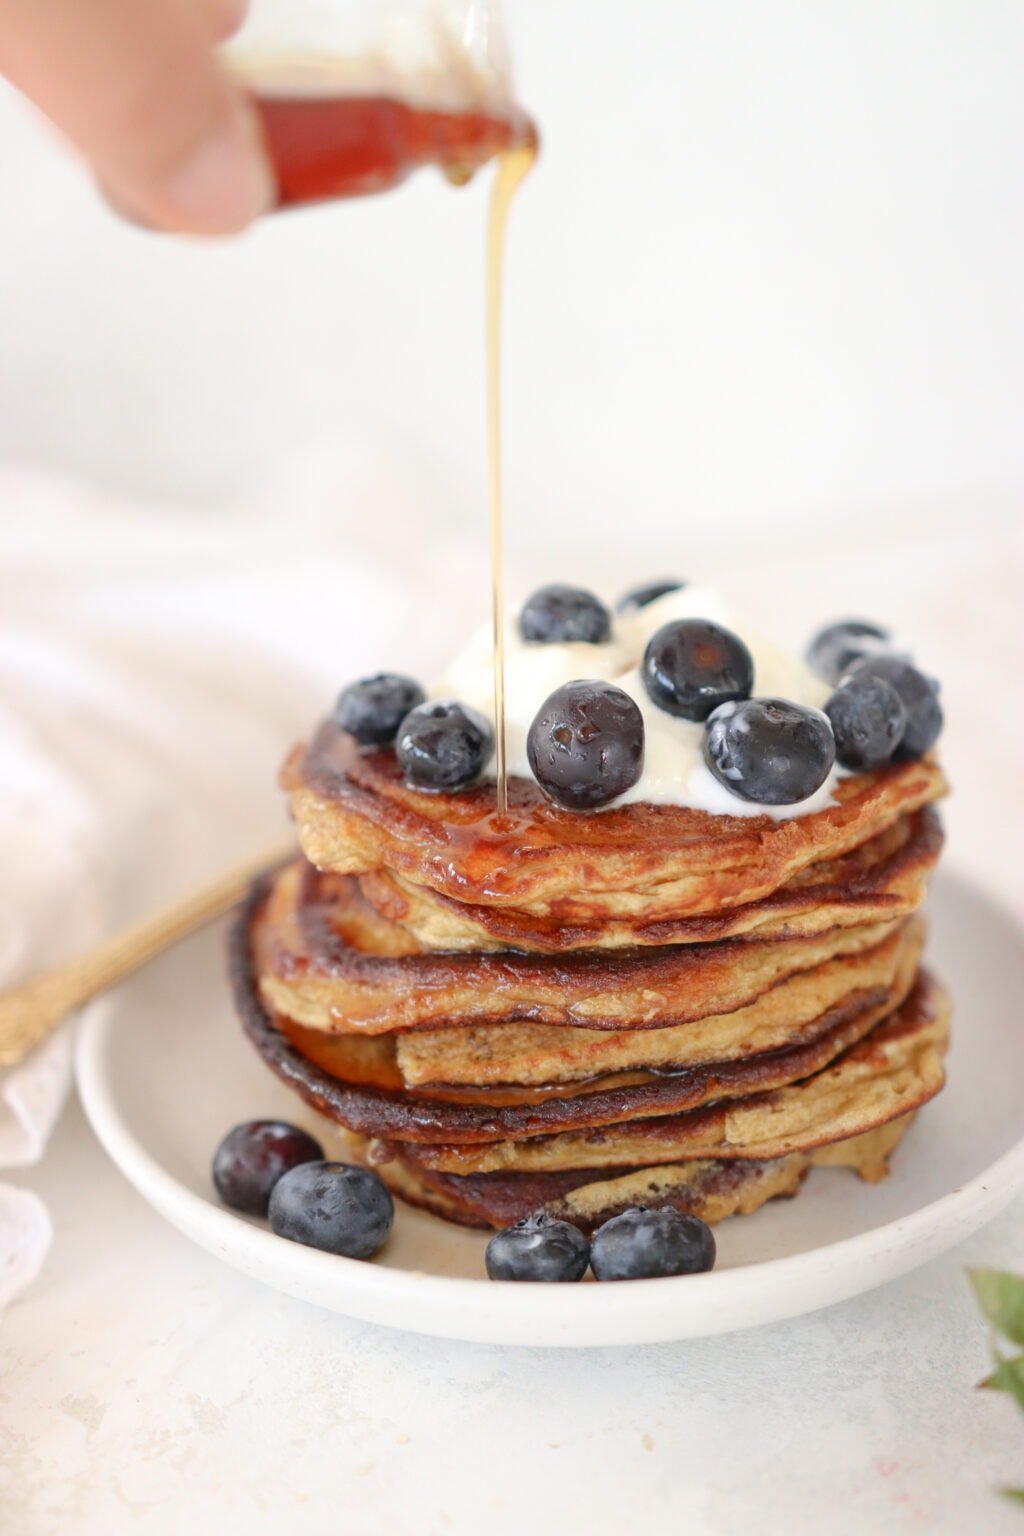 A stack of pancakes topped with yogurt and blueberries with a hand drizzling maple syrup over the stack.